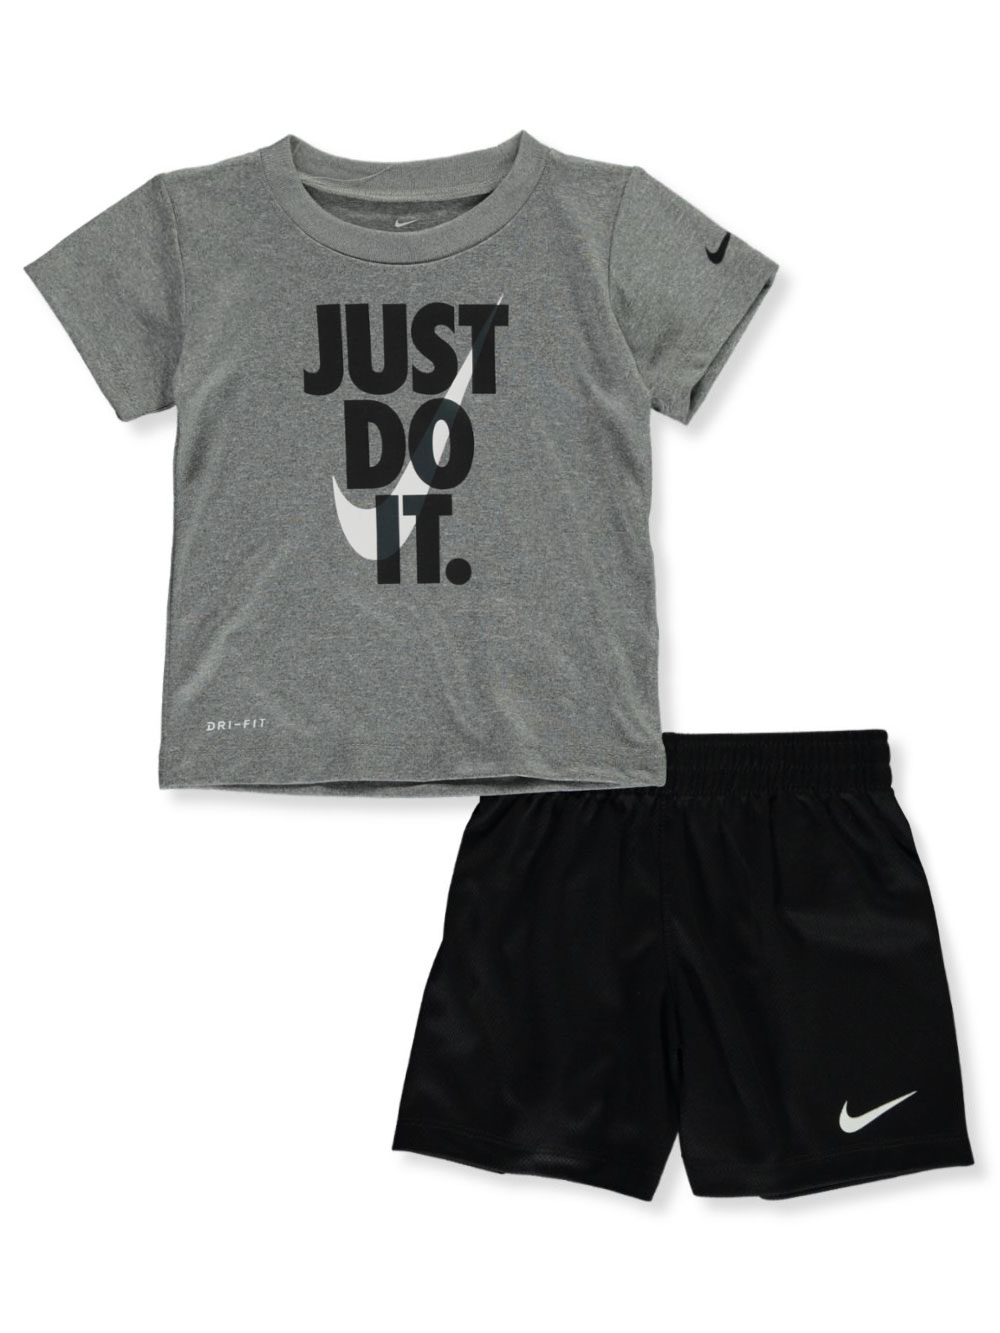 2 piece nike outfit